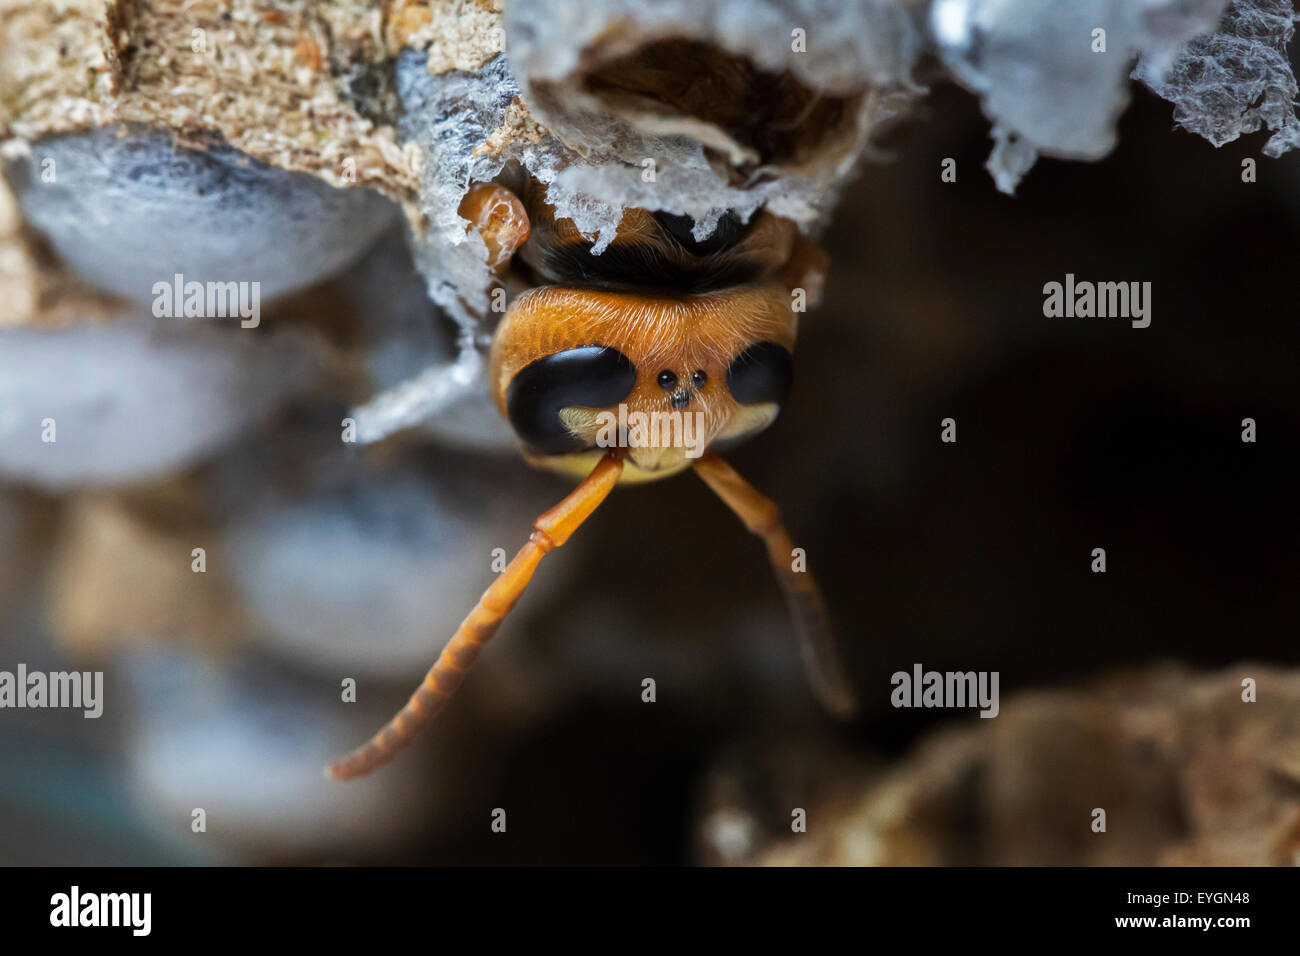 European hornet (Vespa crabro) emerging from brood cell in paper nest Stock Photo